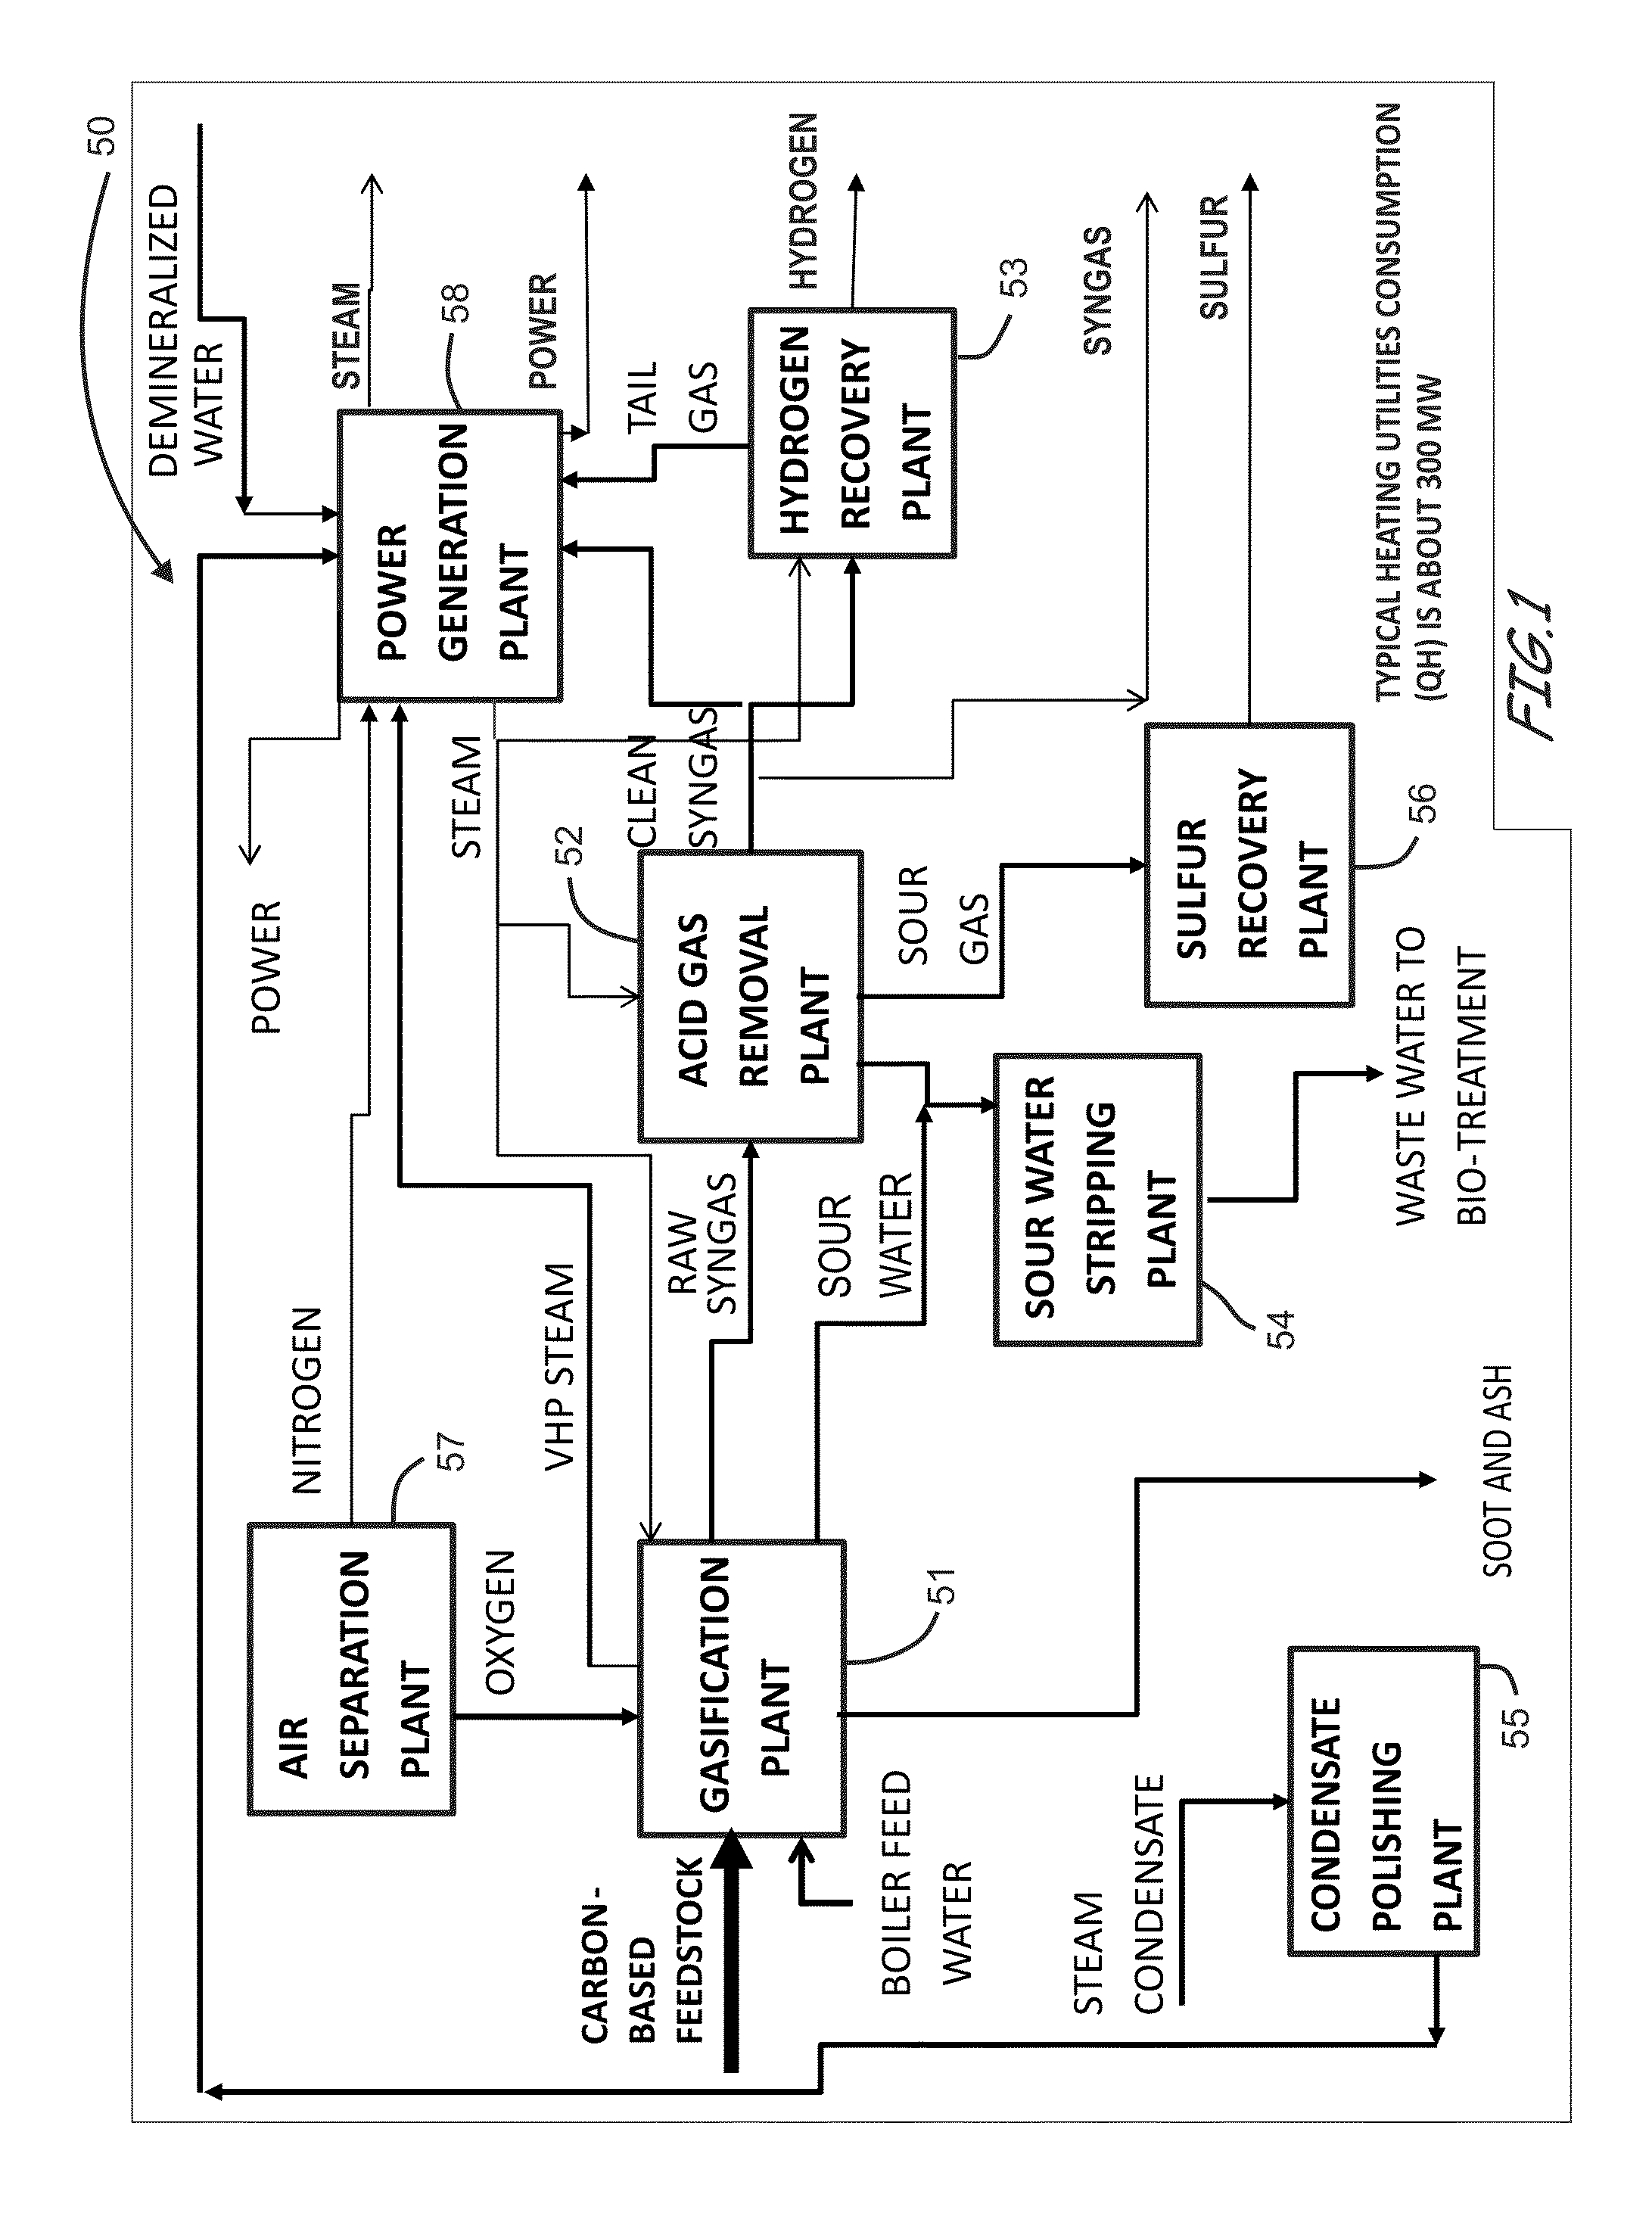 Energy efficient apparatus employing energy efficient process schemes providing enhanced integration of gasification-based multi-generation and hydrocarbon refining facilities and related methods